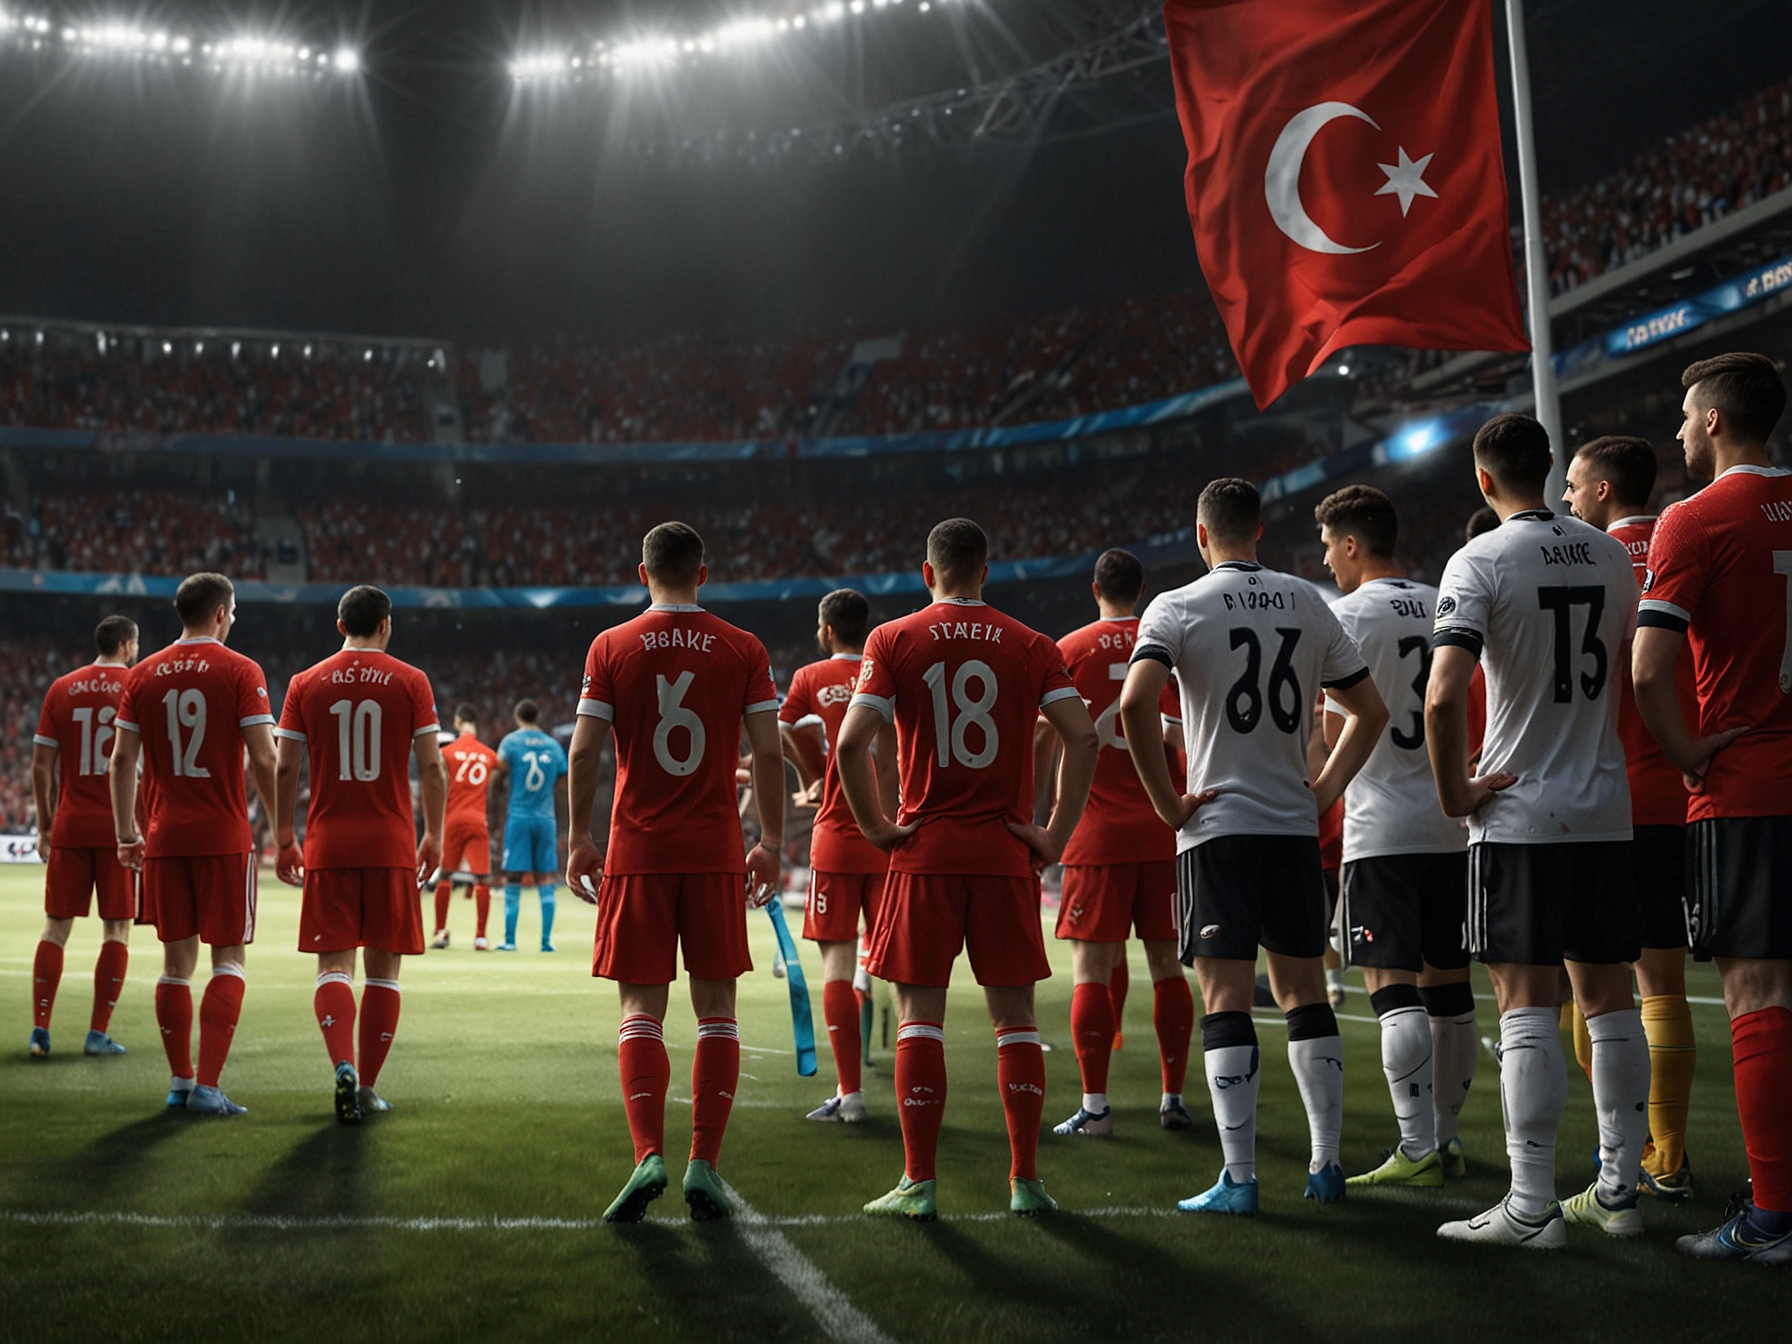 A dramatic scene in a packed stadium as Turkish and Georgian players line up before kickoff, flag bearers raising the national flags, embodying the anticipation and national pride of the Euro 2024 Group F match.